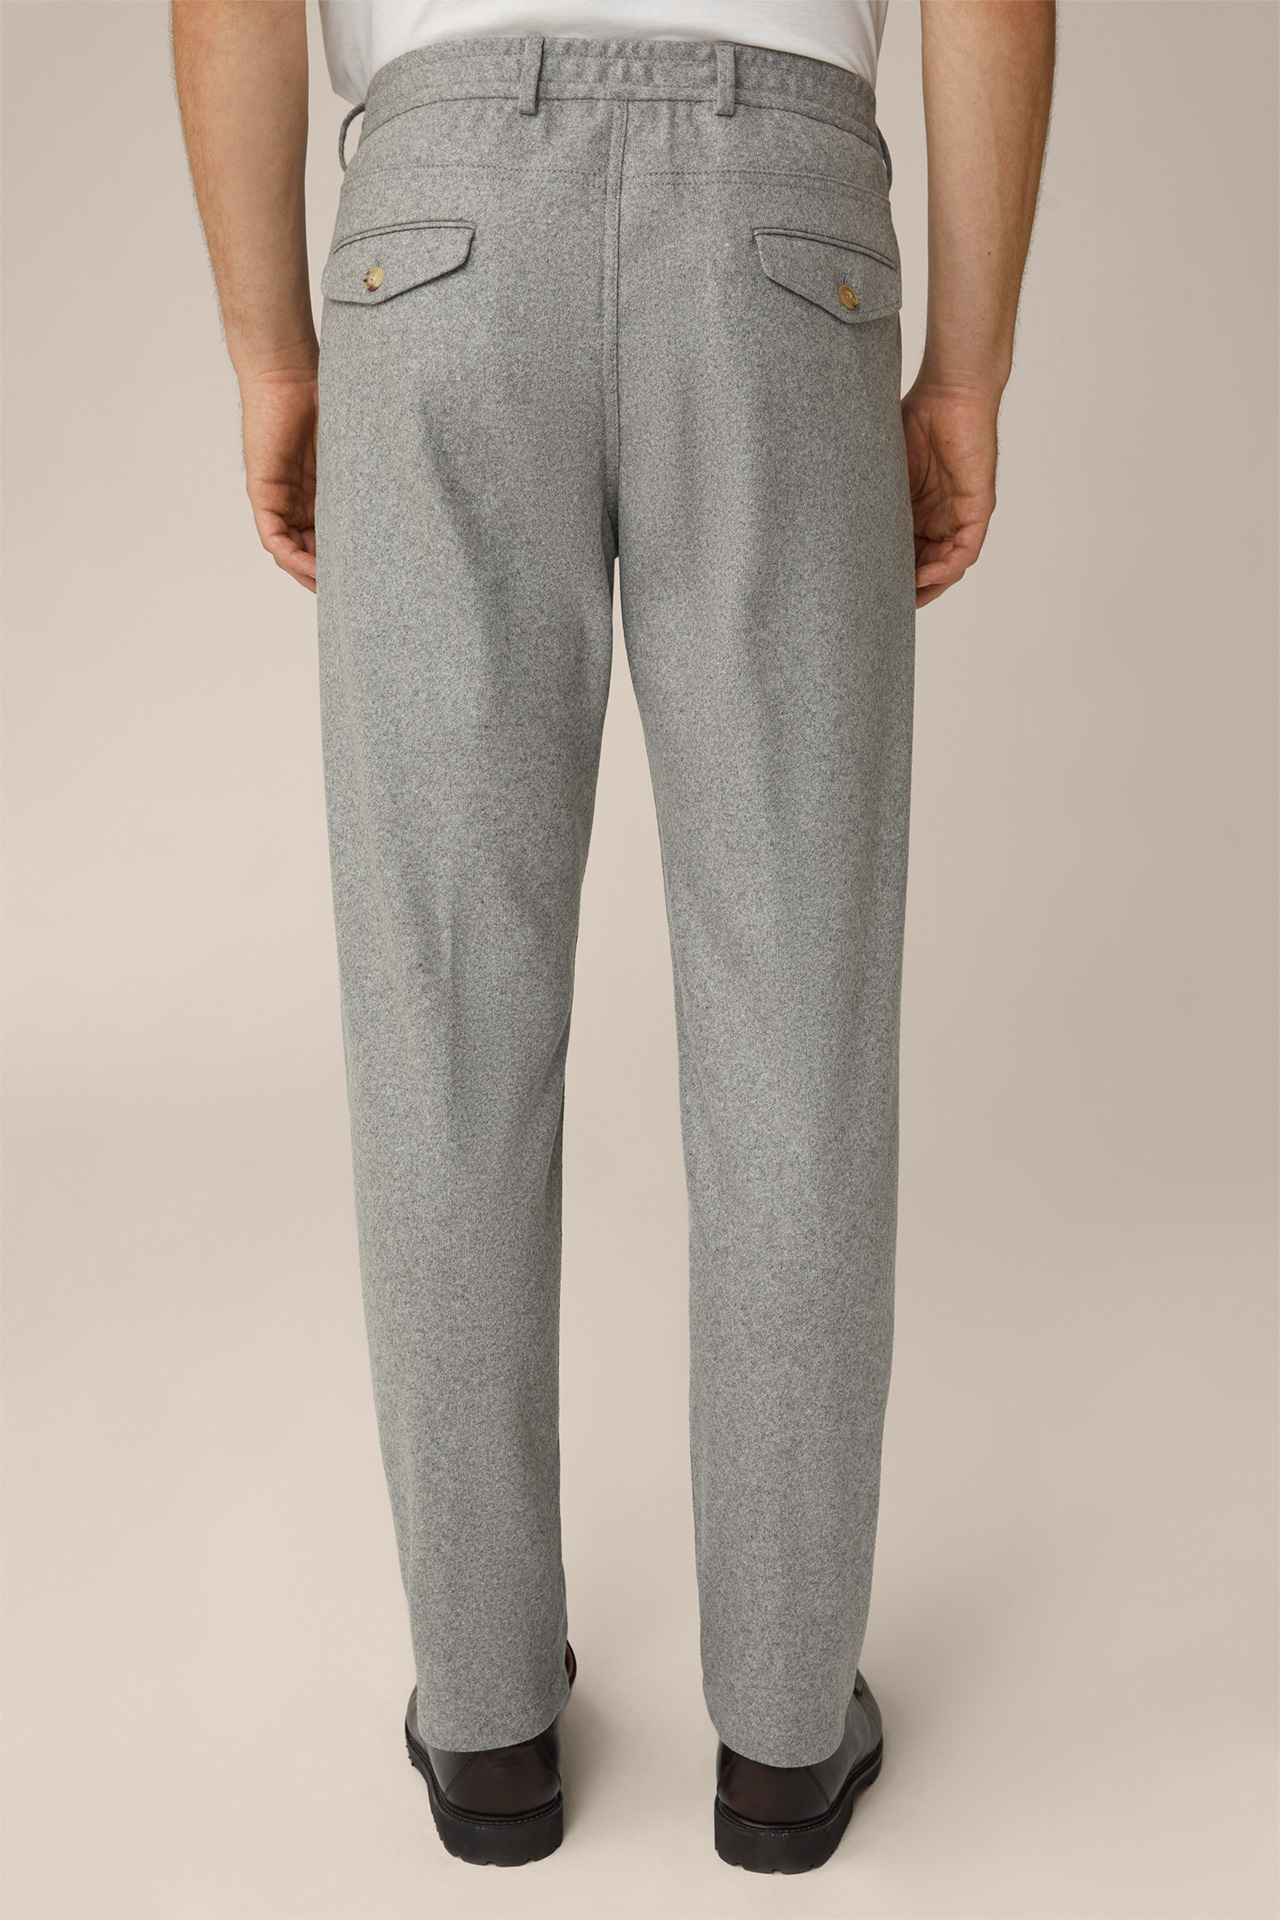 Floro Cashmere Modular Trousers with Pleats in Silver Marl